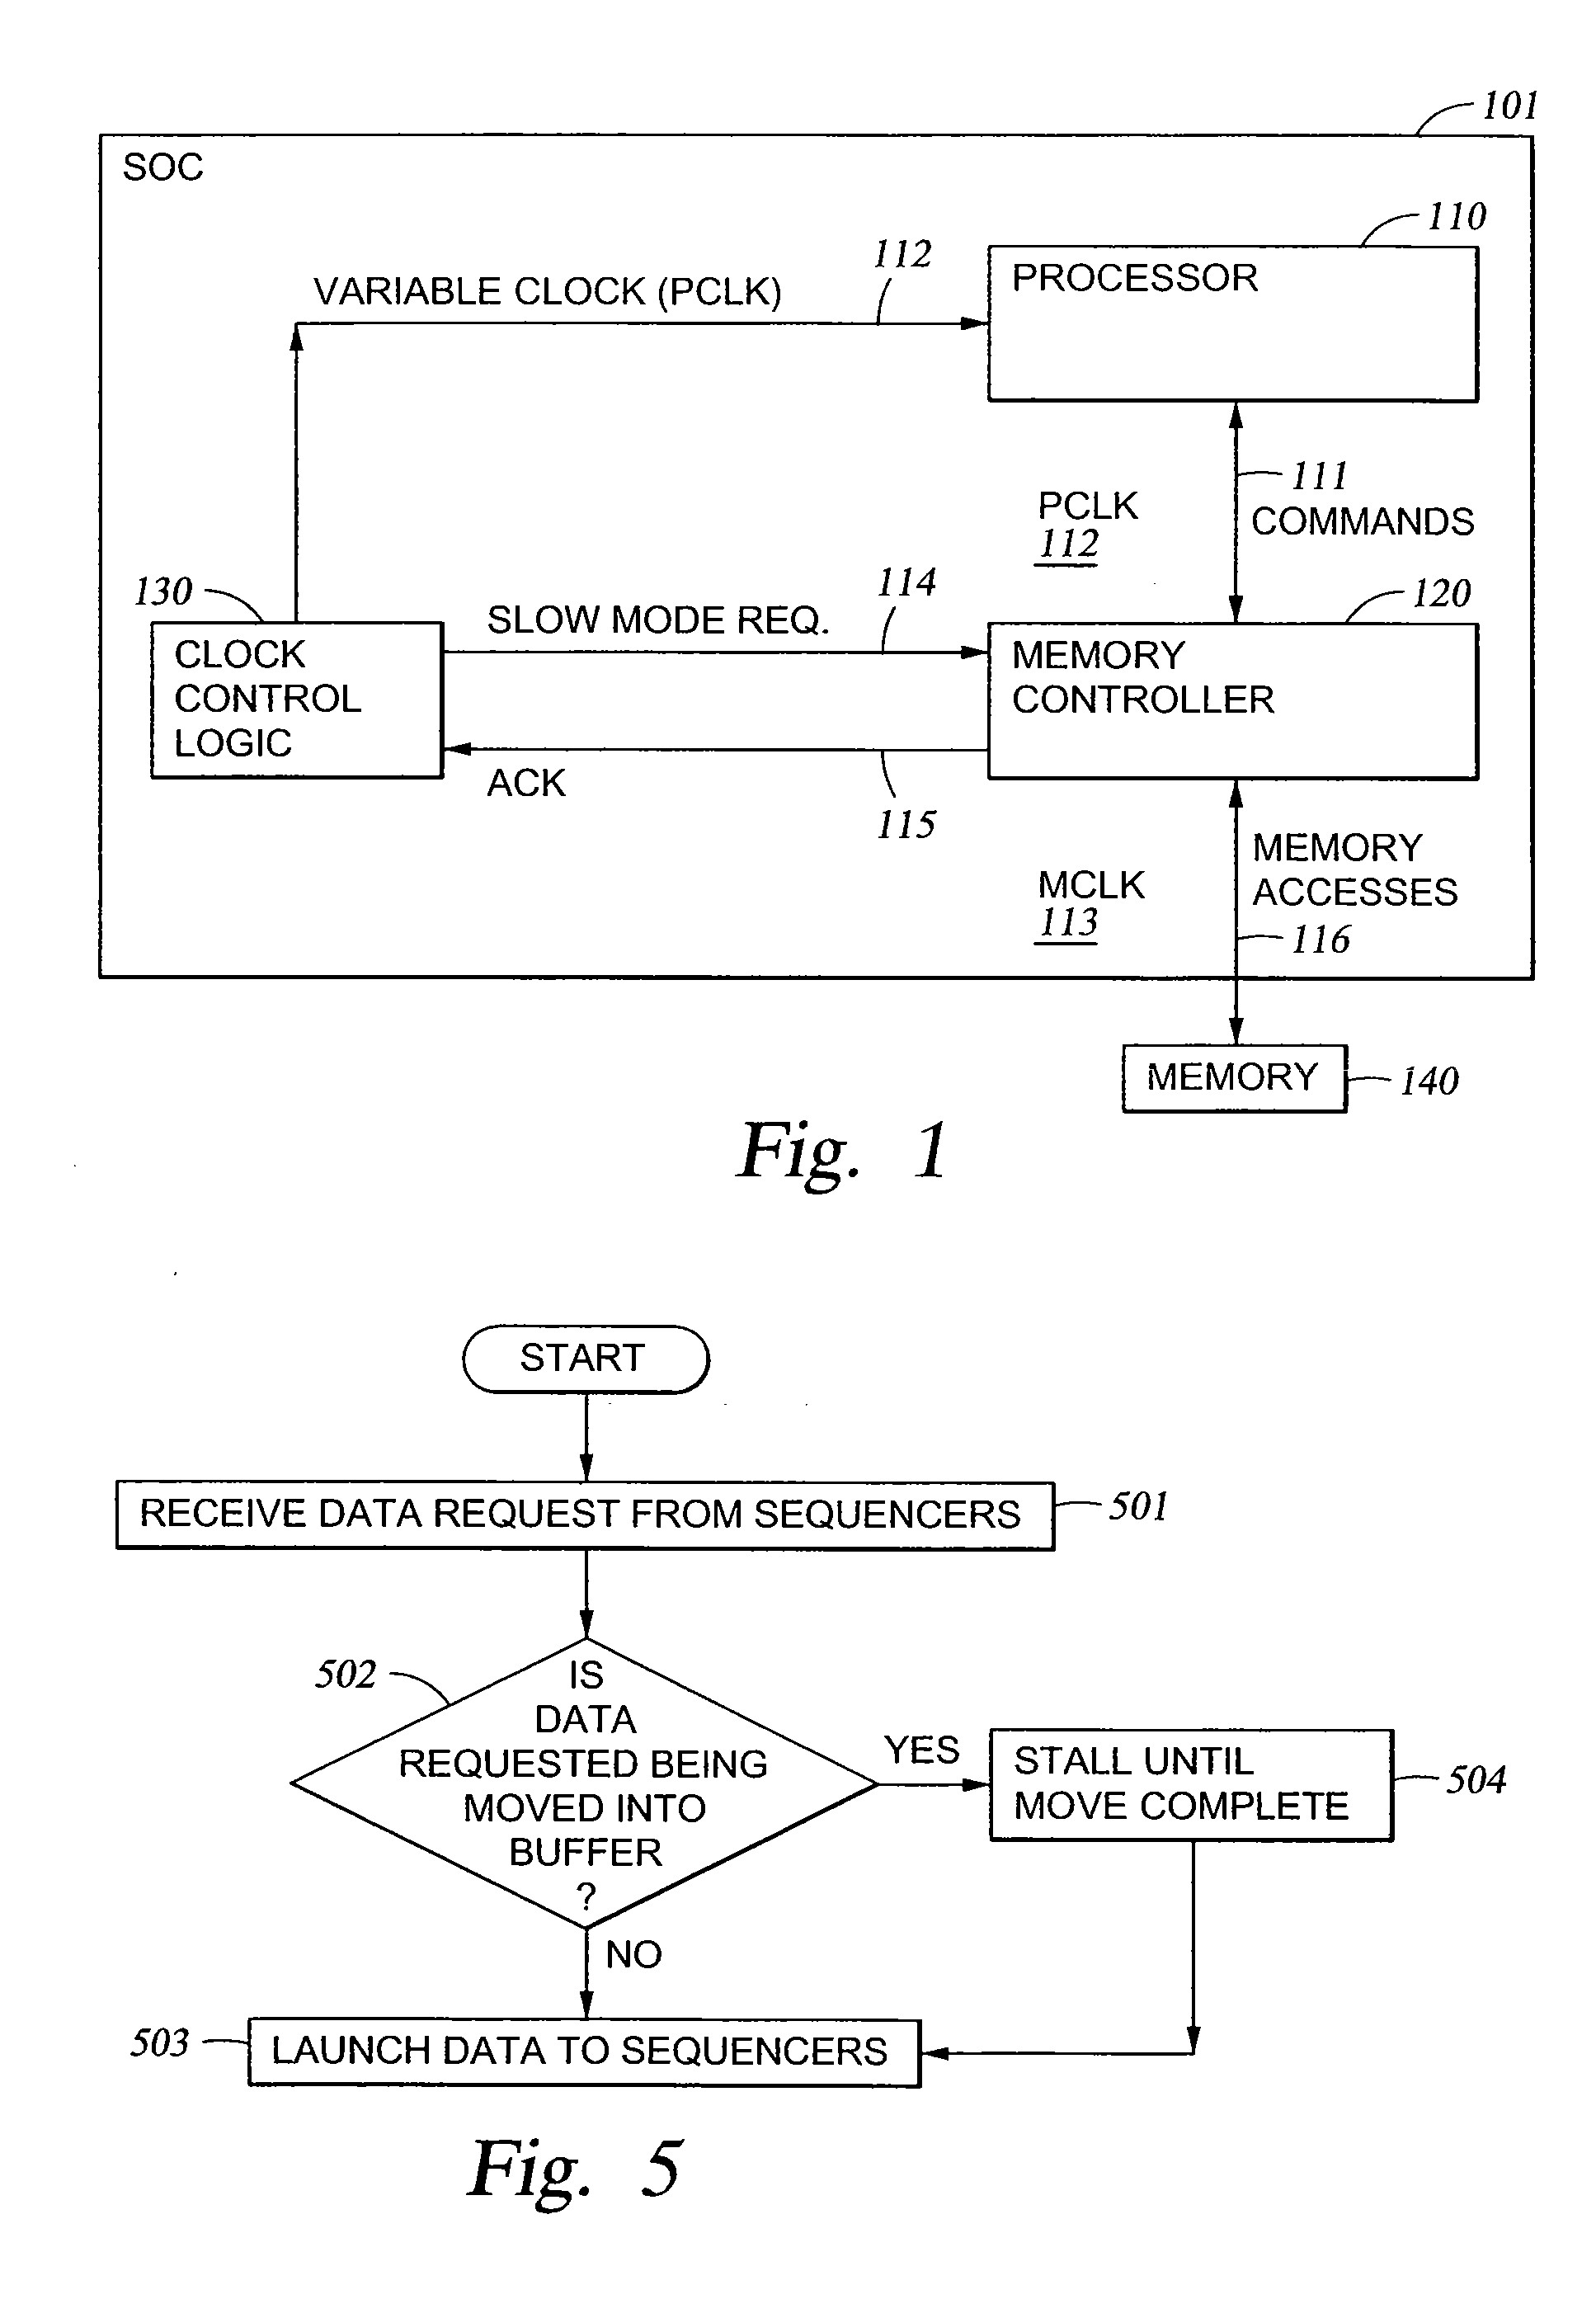 Memory controller operating in a system with a variable system clock